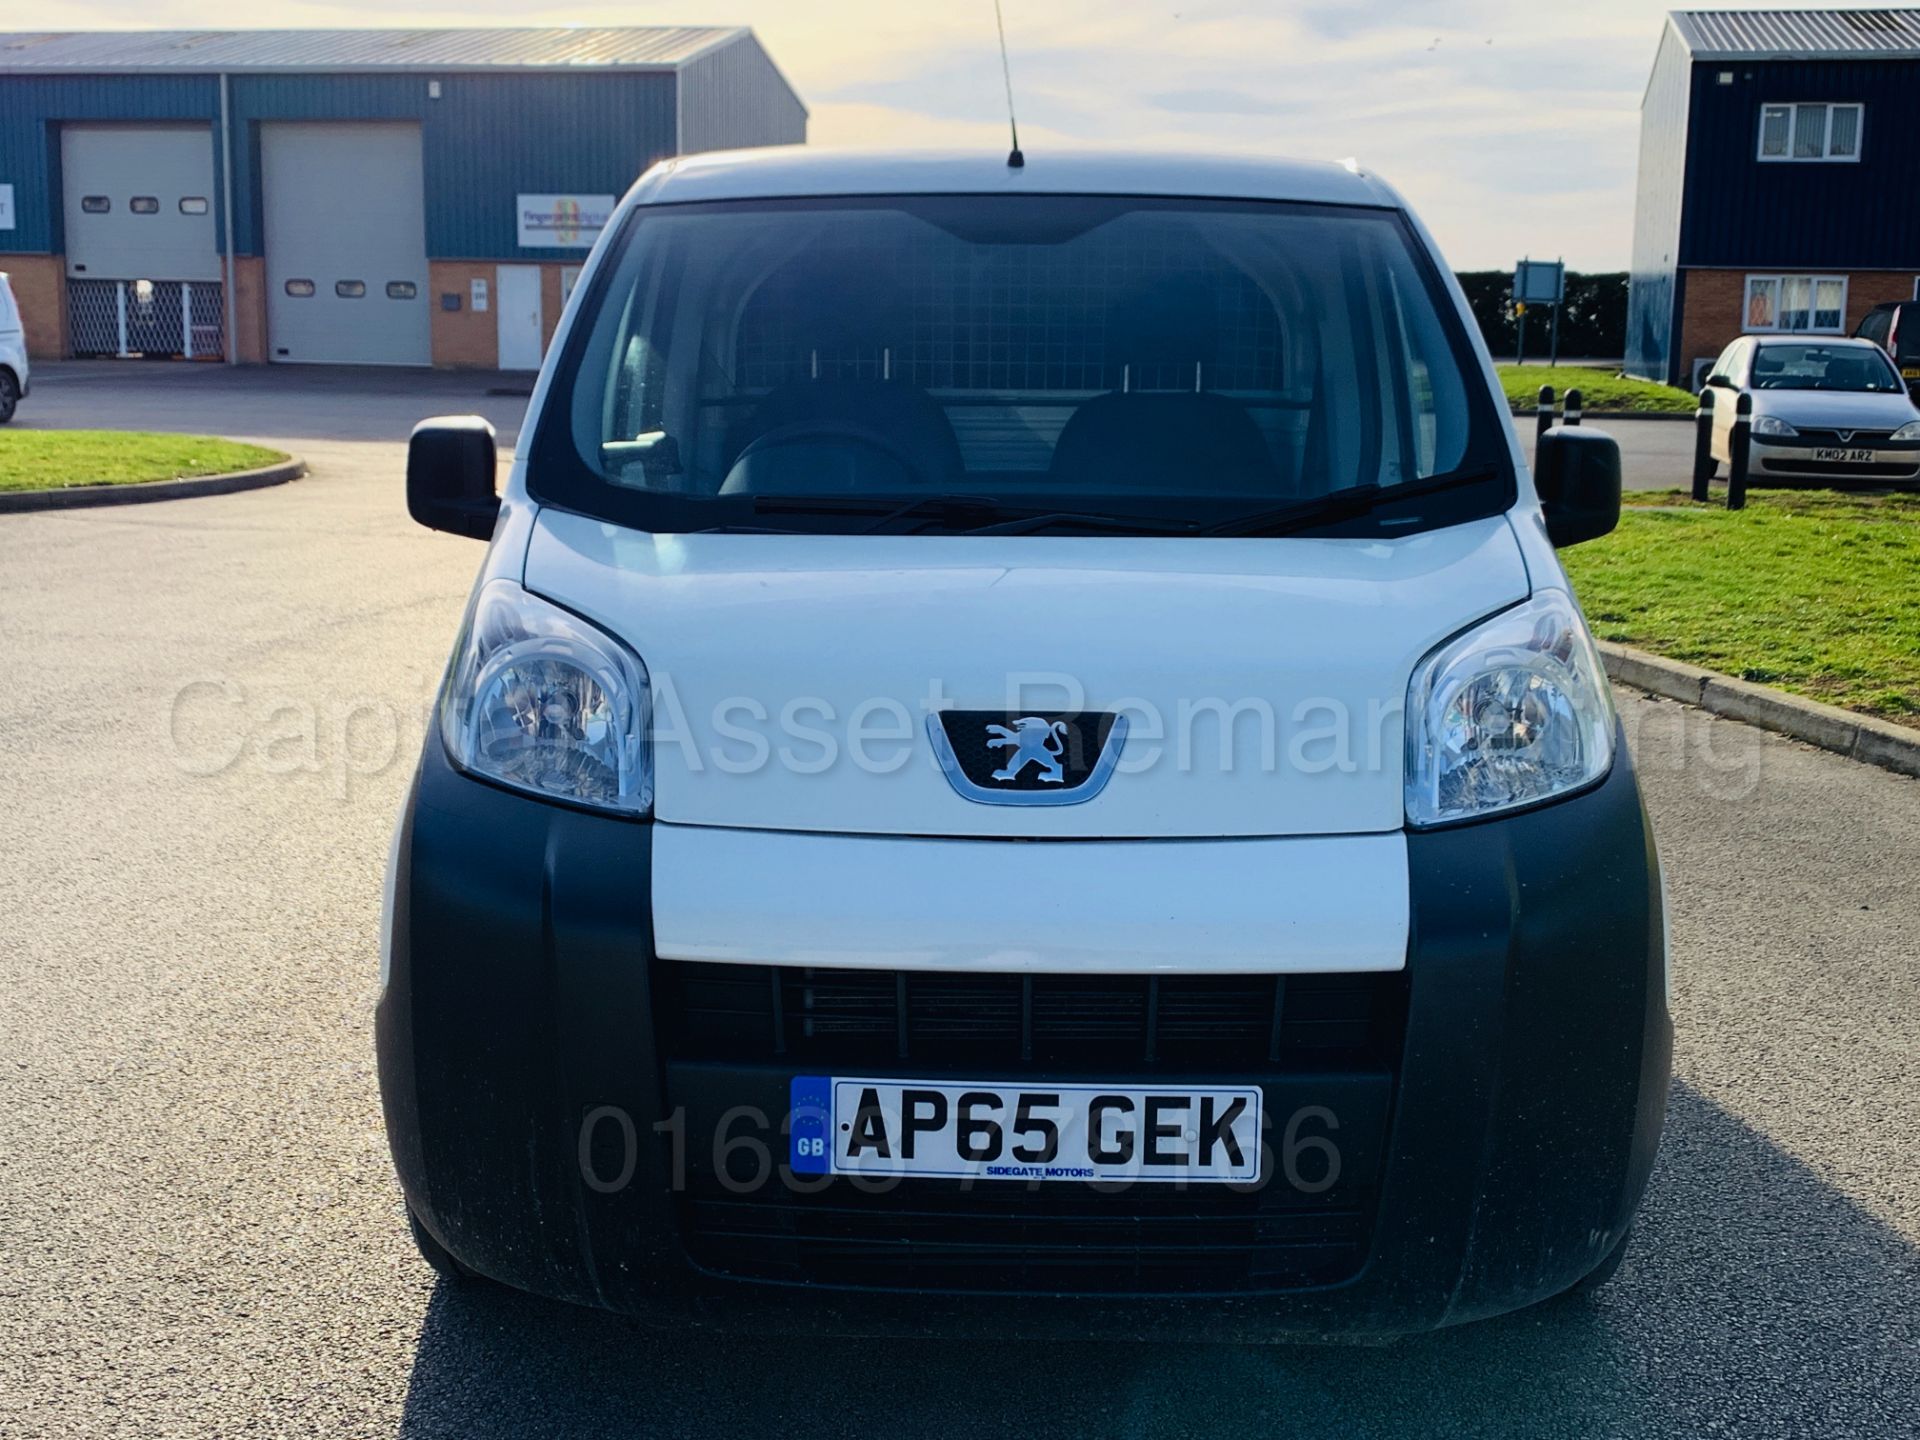 (On Sale) PEUGEOT BIPPER *PROFESSIONAL* LCV - PANEL VAN (65 REG) 'HDI - 5 SPEED' (1 OWNER) *AIR CON* - Image 3 of 36